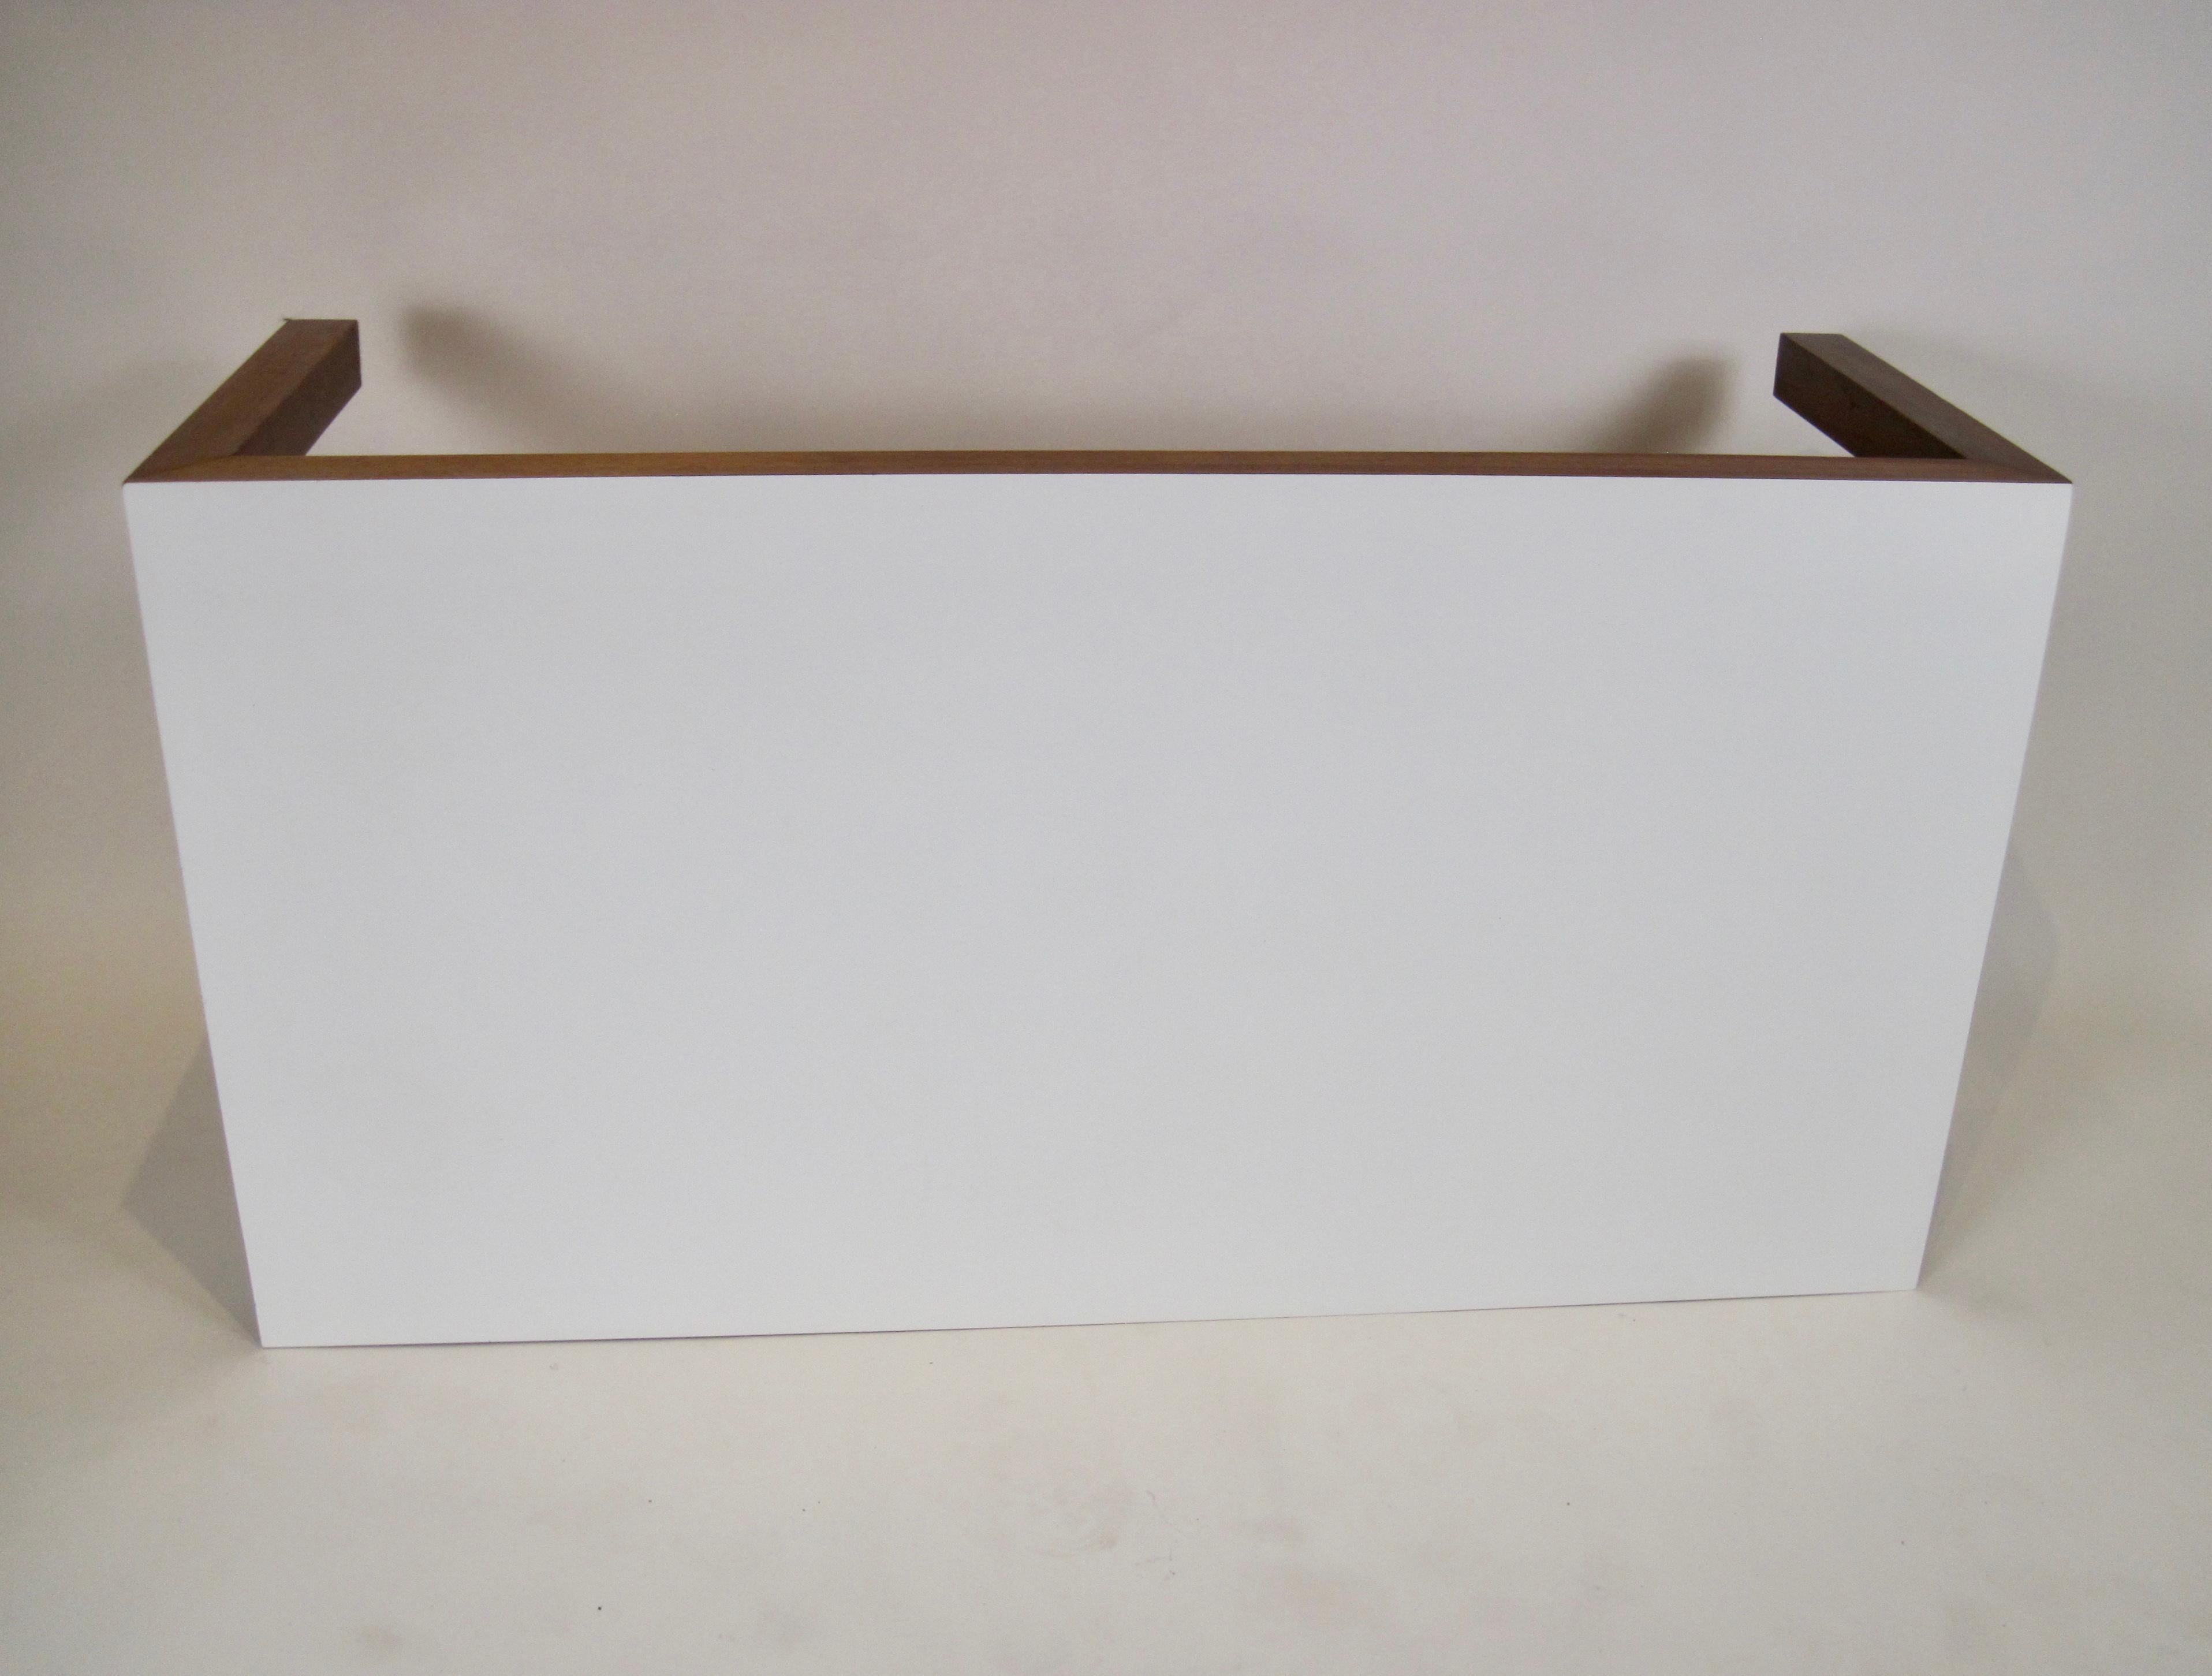 1960s Rectangular Wood Coffee Table with White Formica Laminate Top For Sale 6